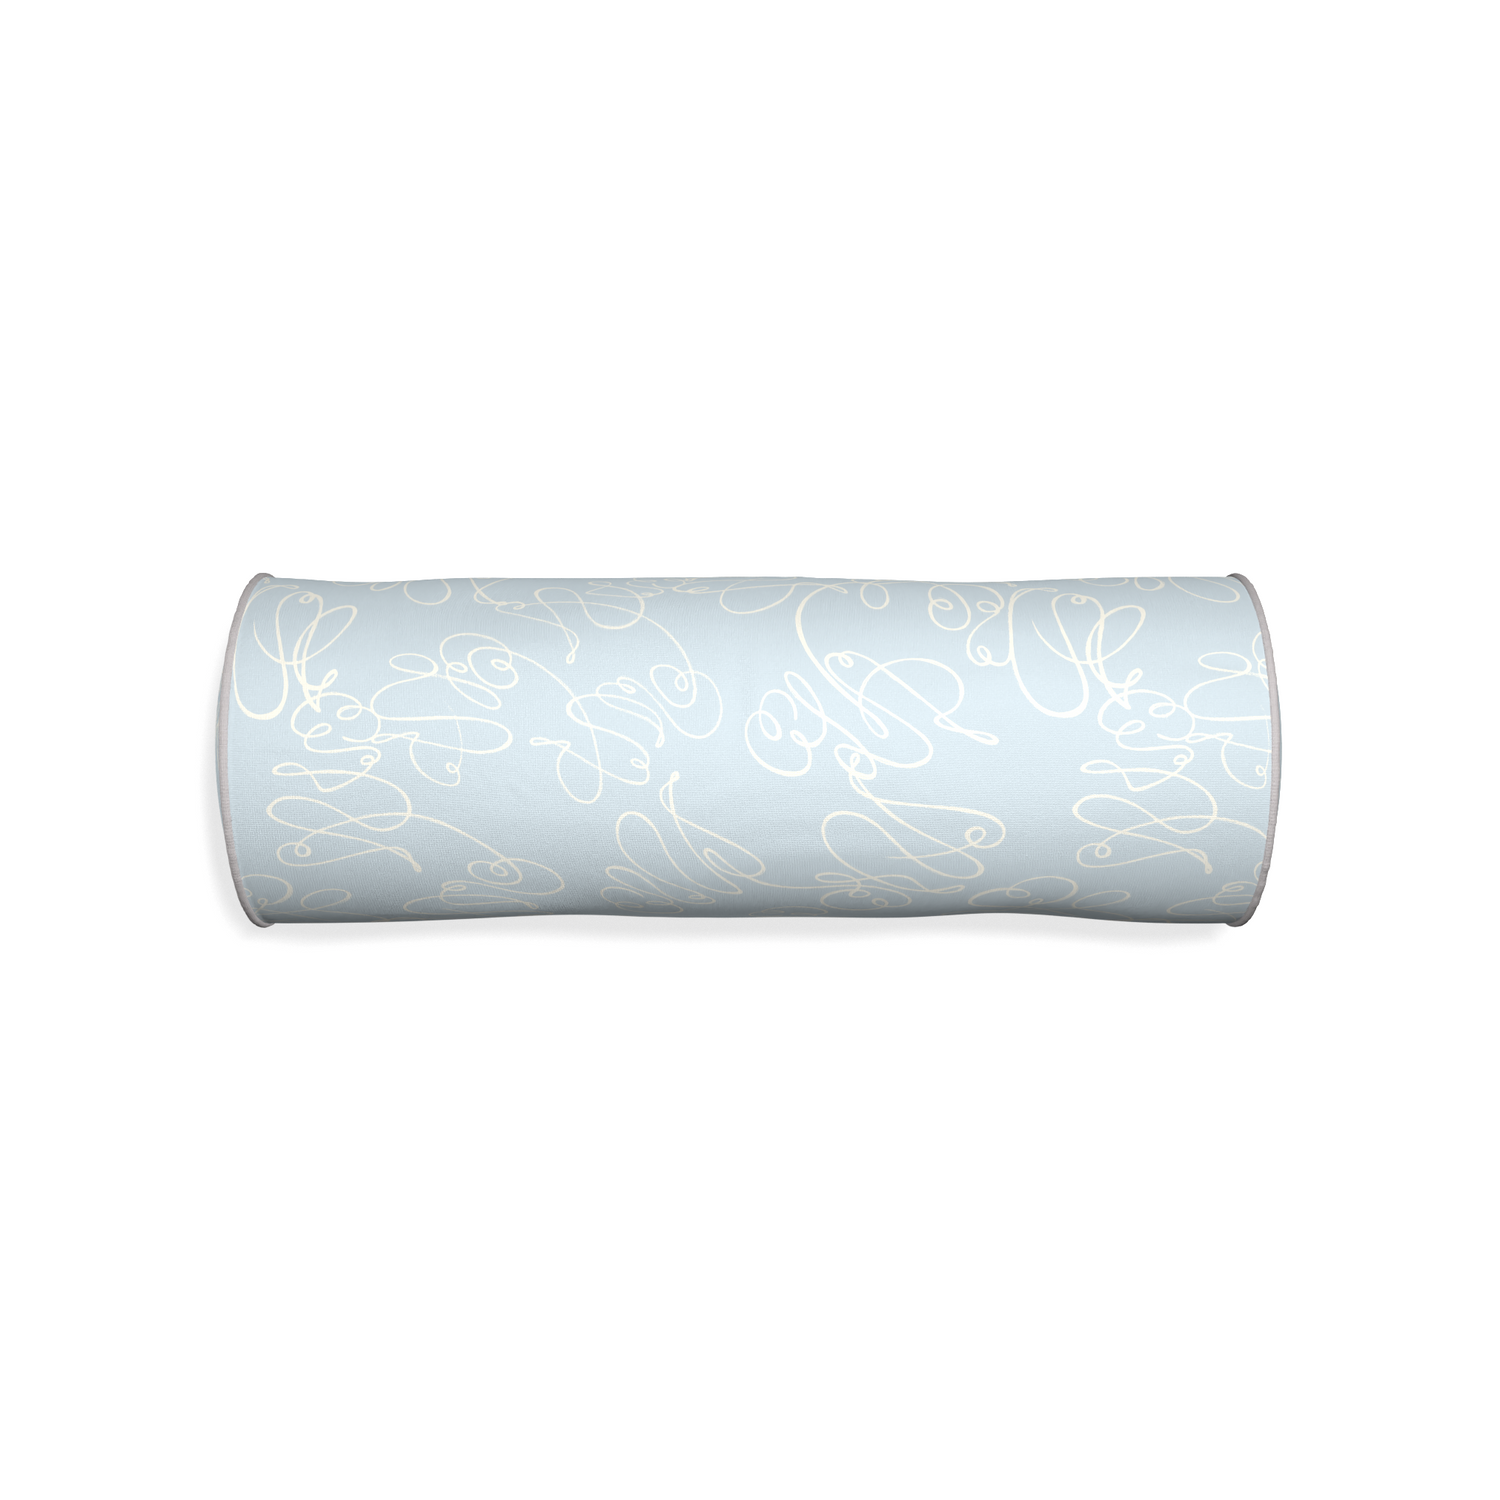 Bolster mirabella custom powder blue abstractpillow with pebble piping on white background